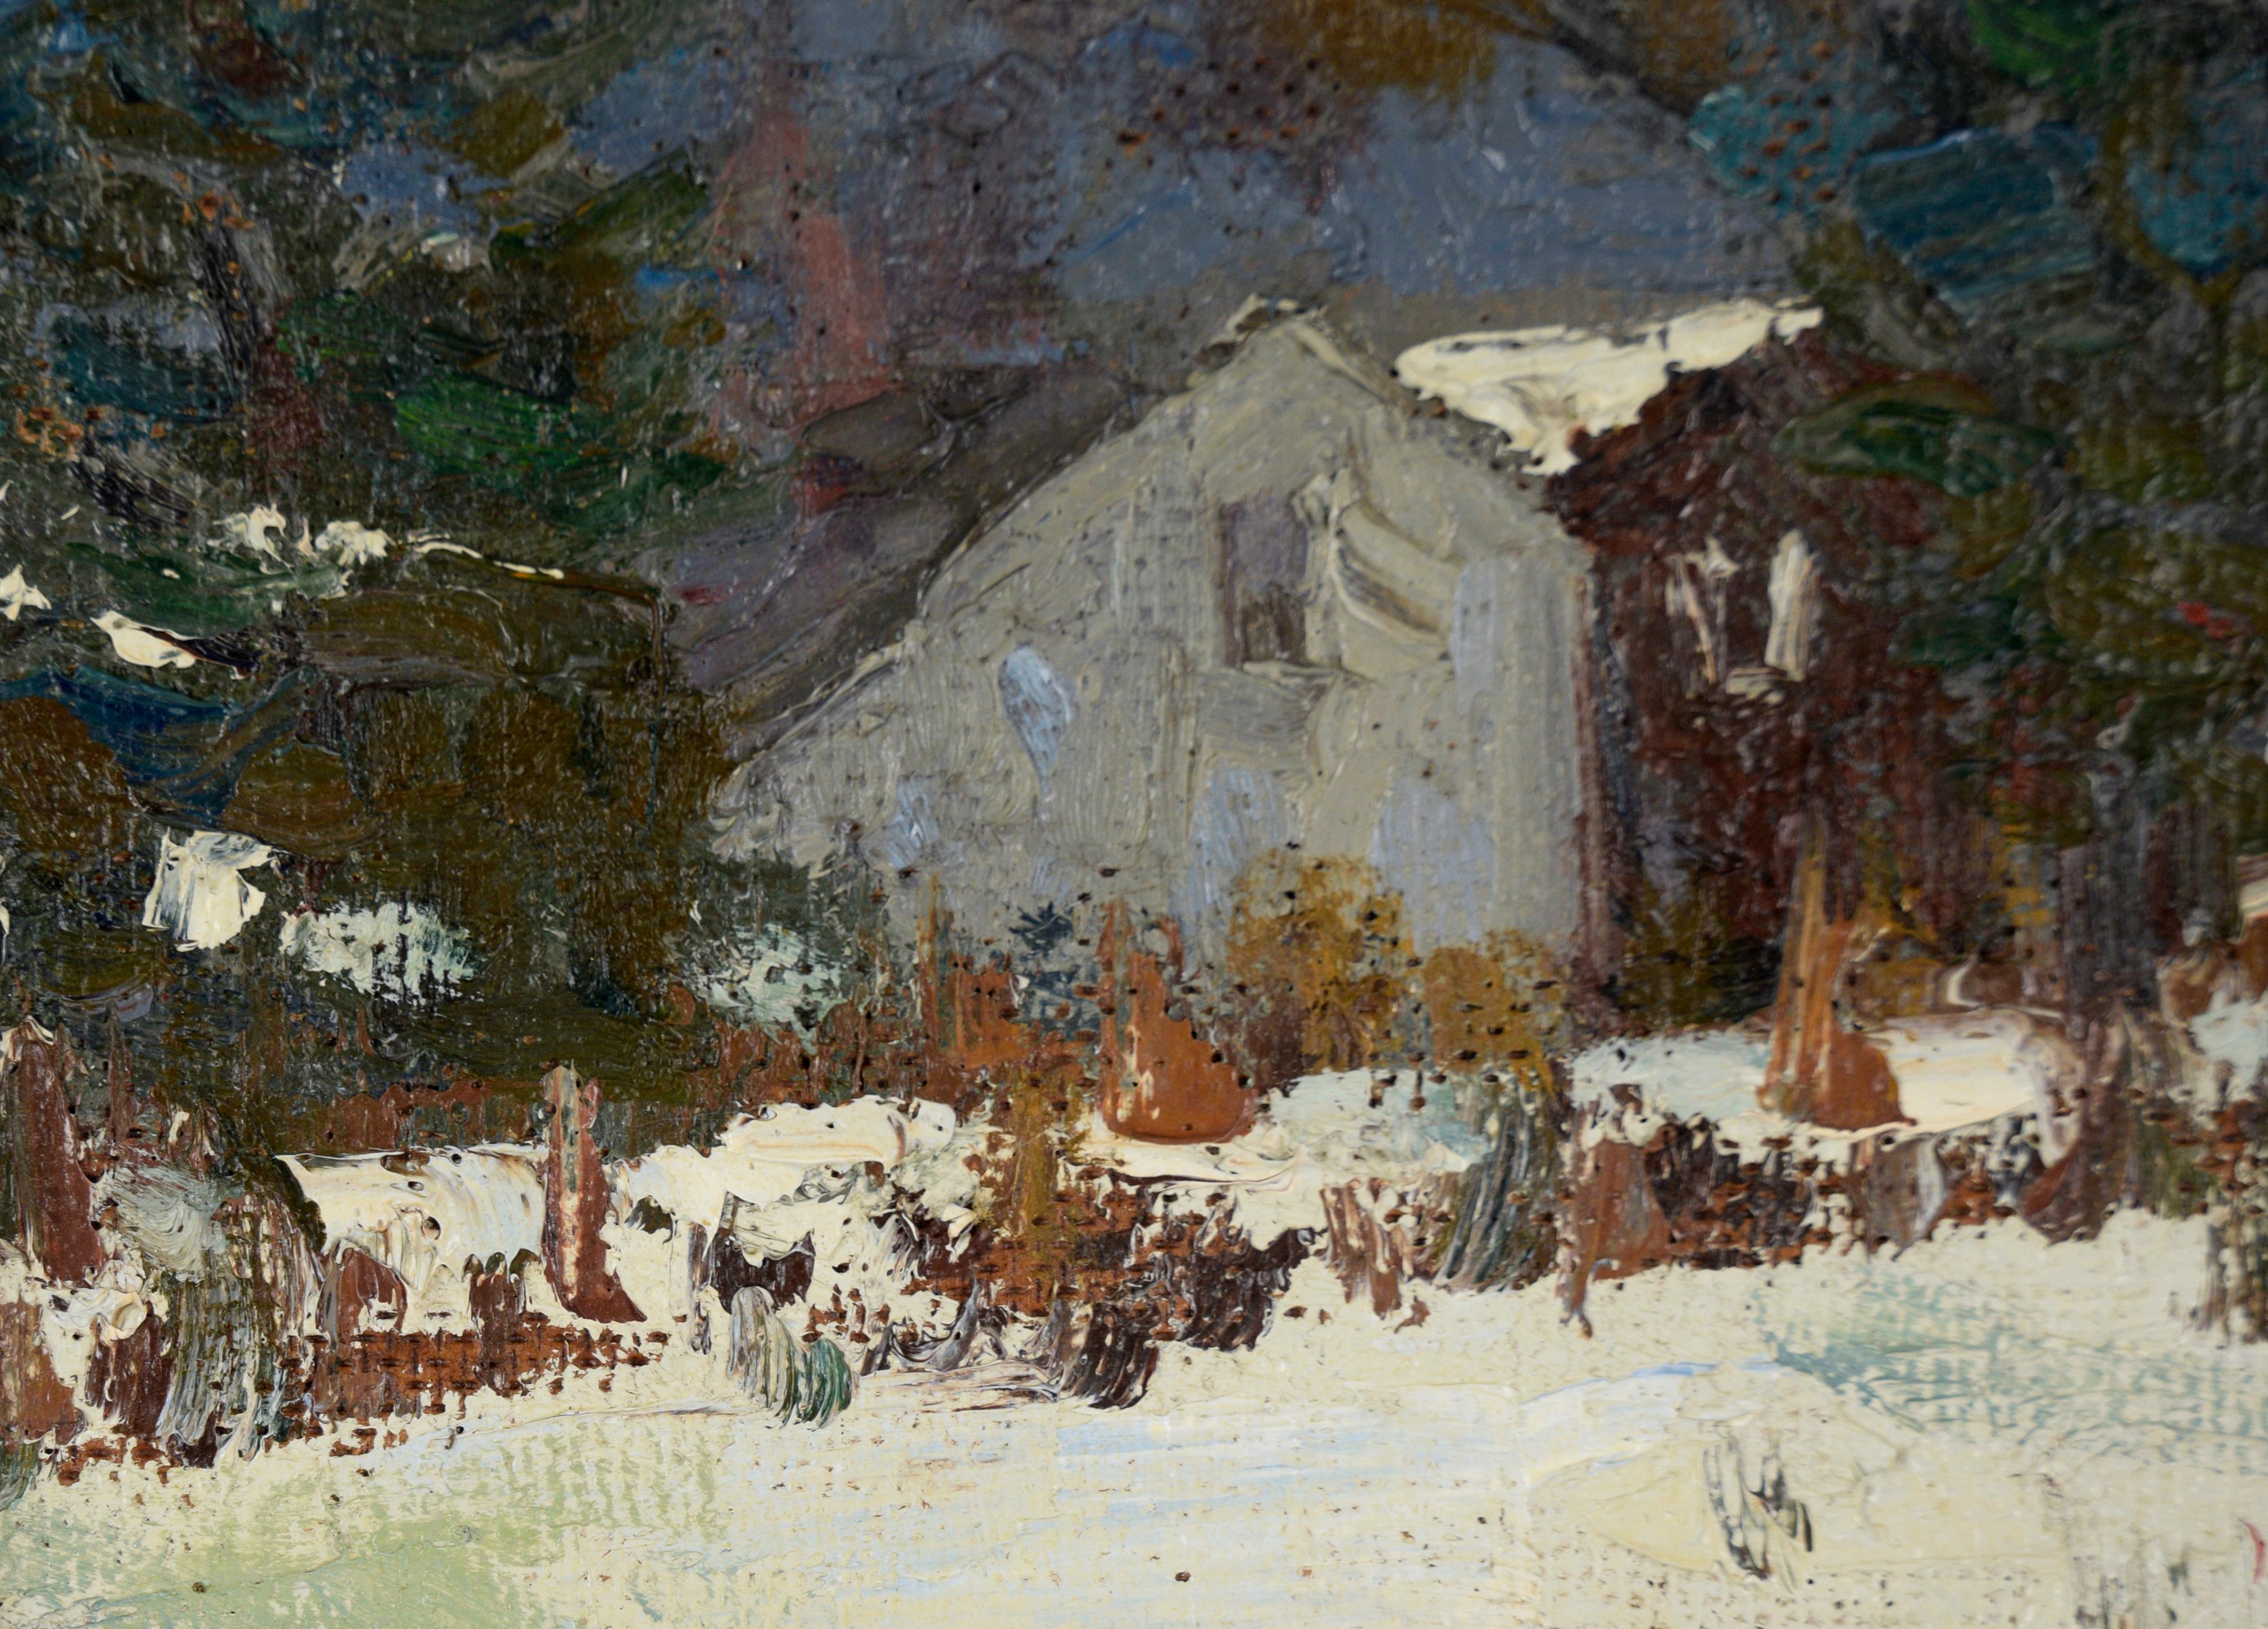 Serene winter landscape with a cabin by Bernard Lennon (American, 1914-1992). The scene is covered in fresh snow, with a house tucked away between the trees. This piece has great texture, adding depth and dimensionality. 

Signed 